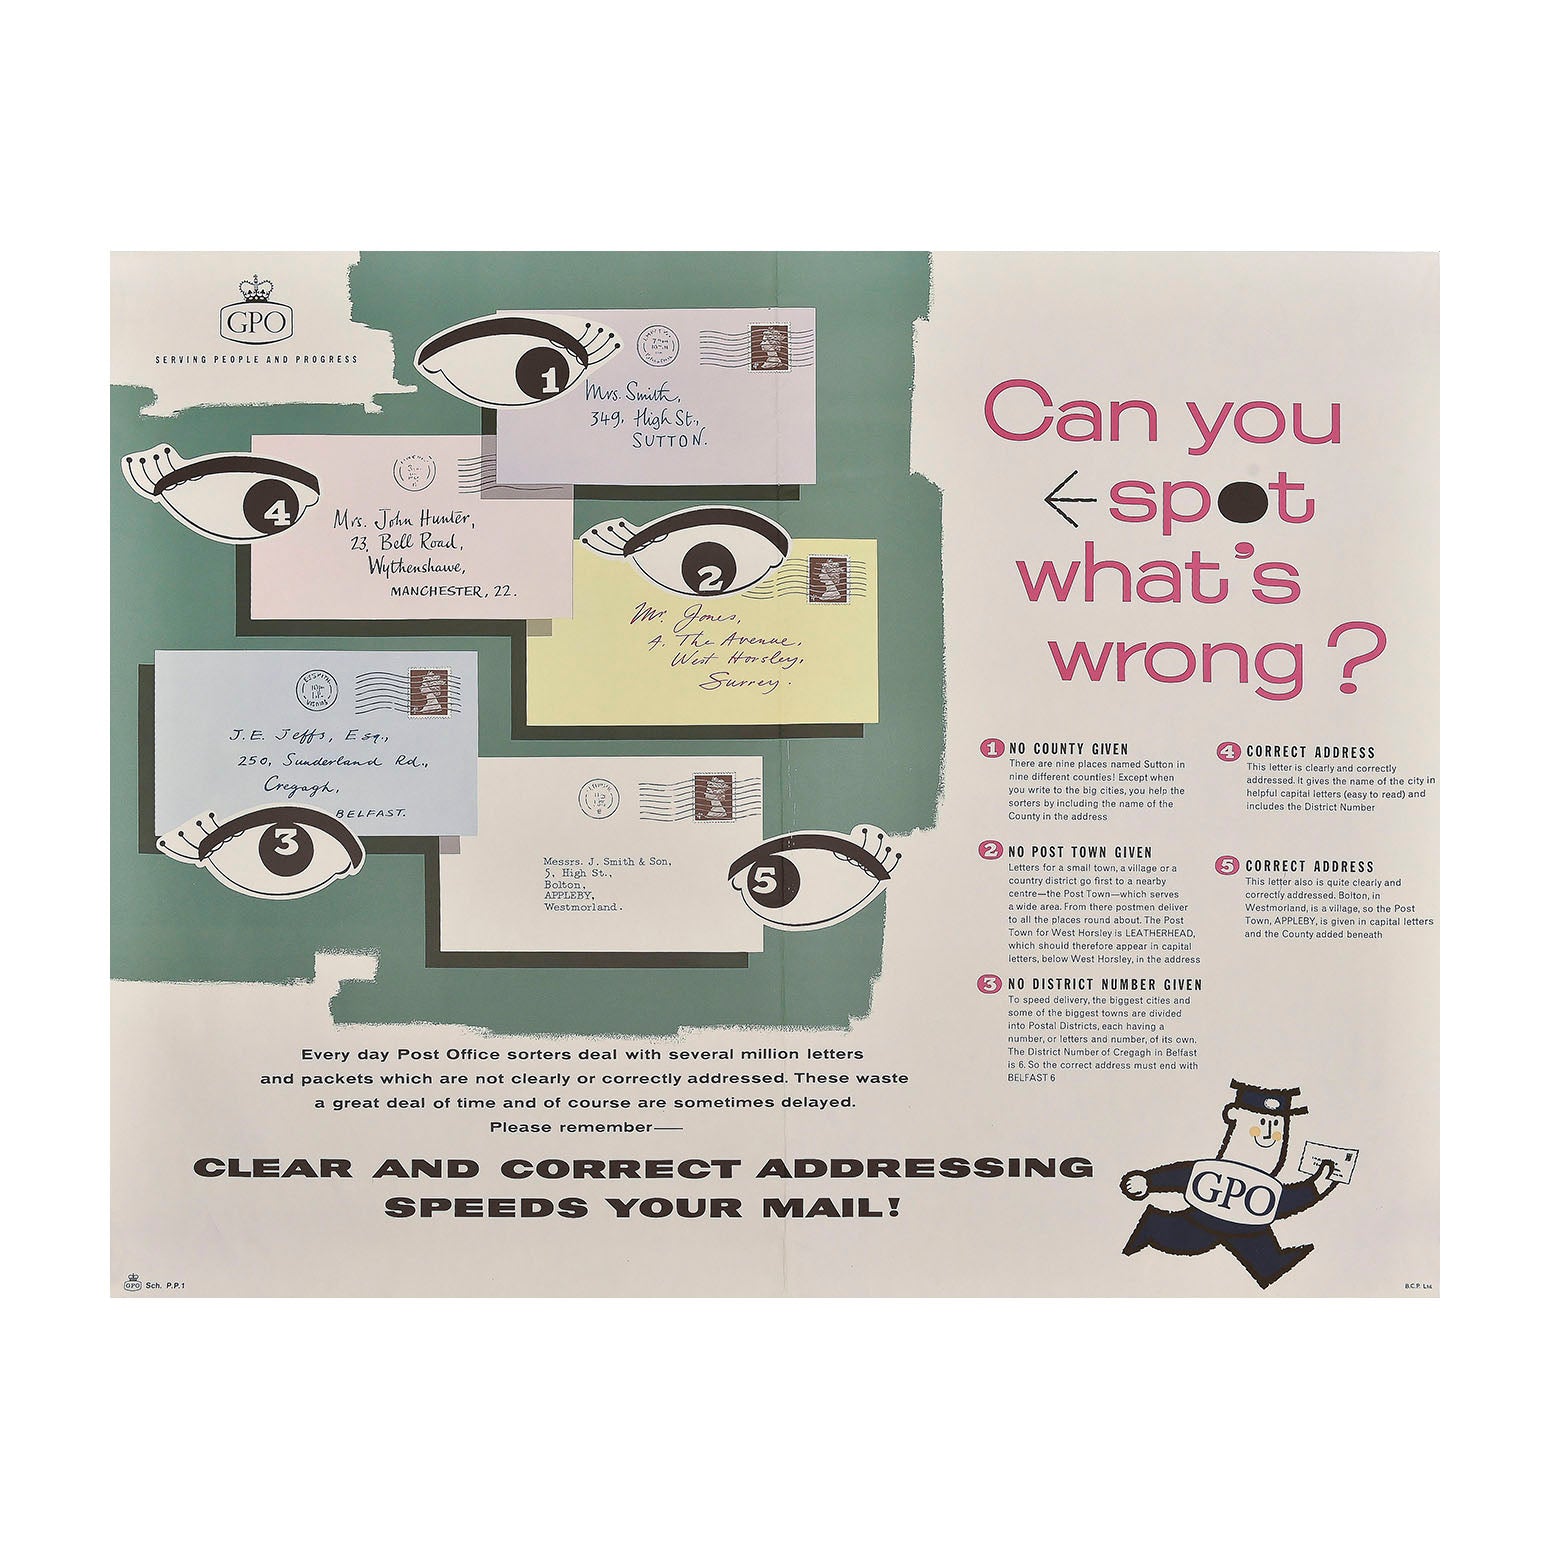 Original, large format, 1960s General Post Office (GPO) information poster, showing the correct way to address an envelope. 